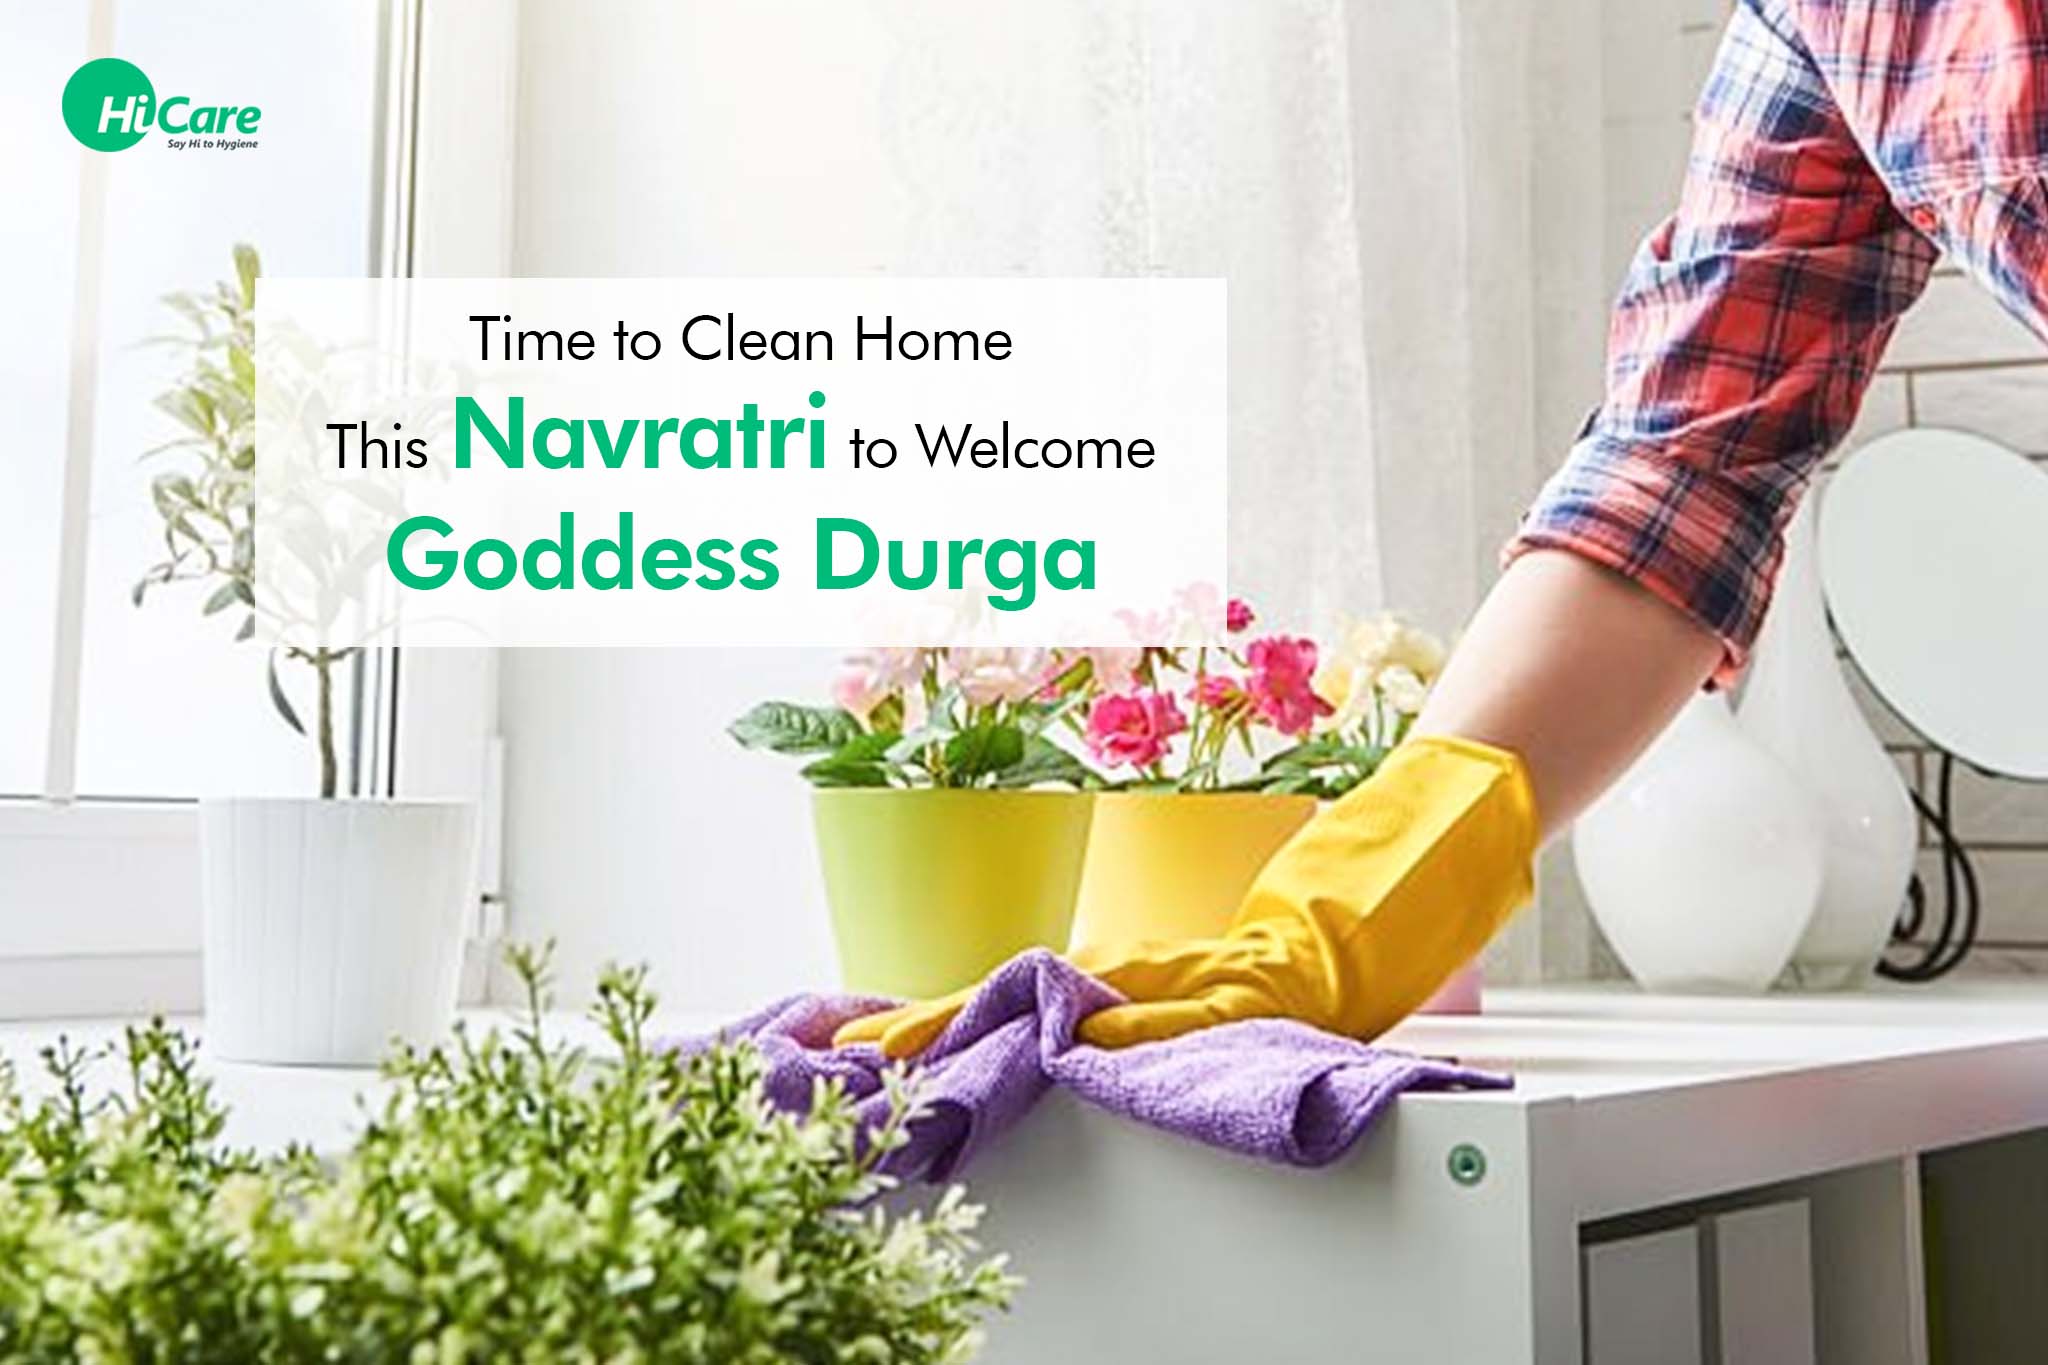 Time to Clean Home This Navratri to Welcome Goddess Durga